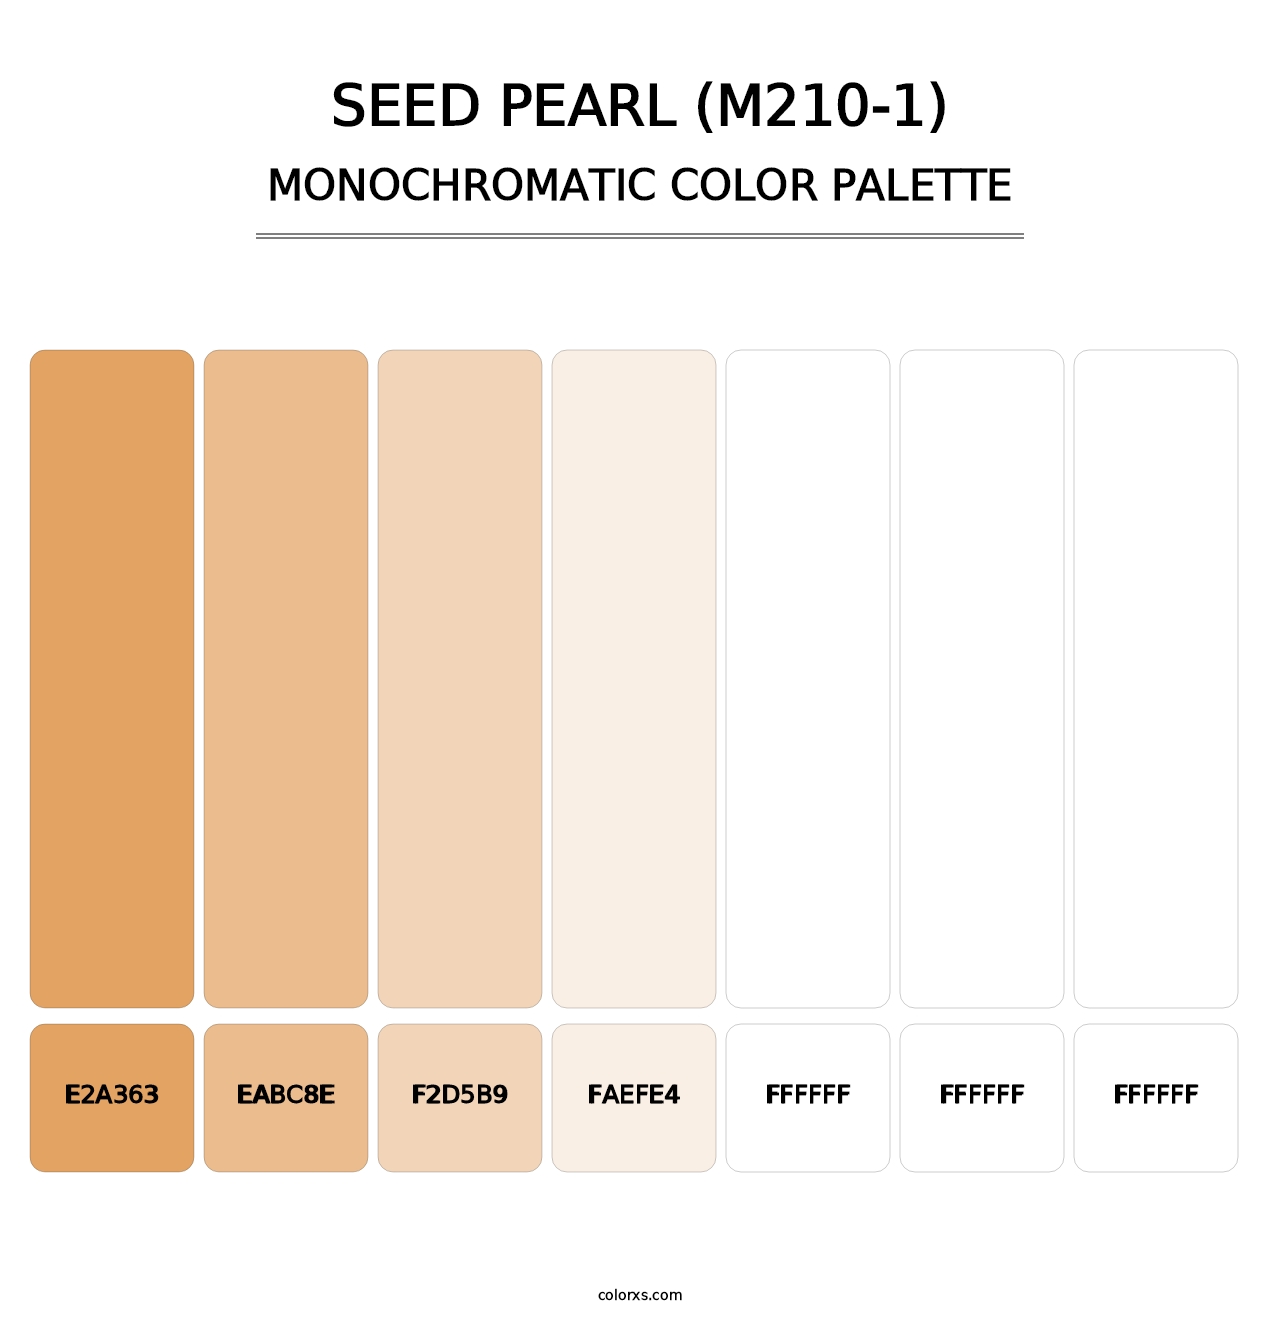 Seed Pearl (M210-1) - Monochromatic Color Palette